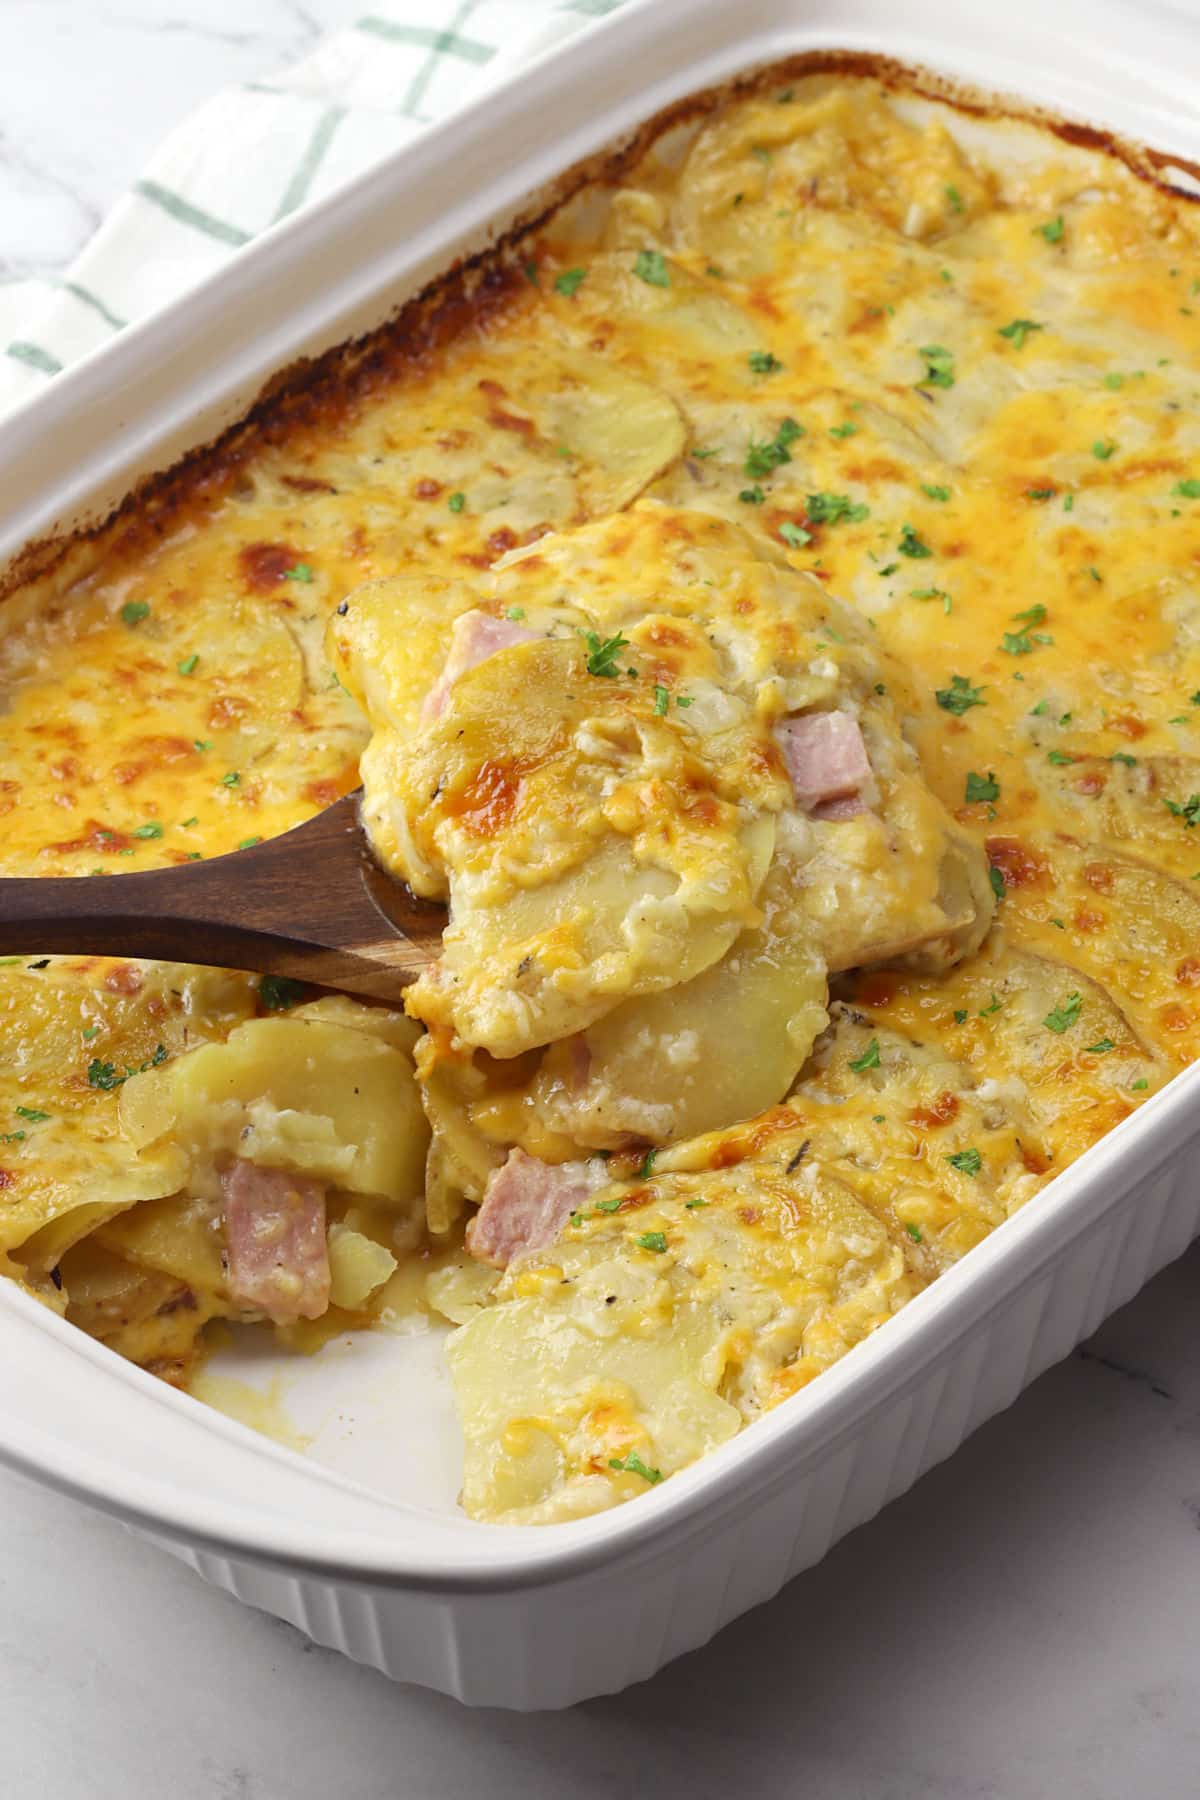 A white casserole dish filled with layers of thin sliced potatoes, ham, and cheese, with a wooden spatula scooping a serving out.